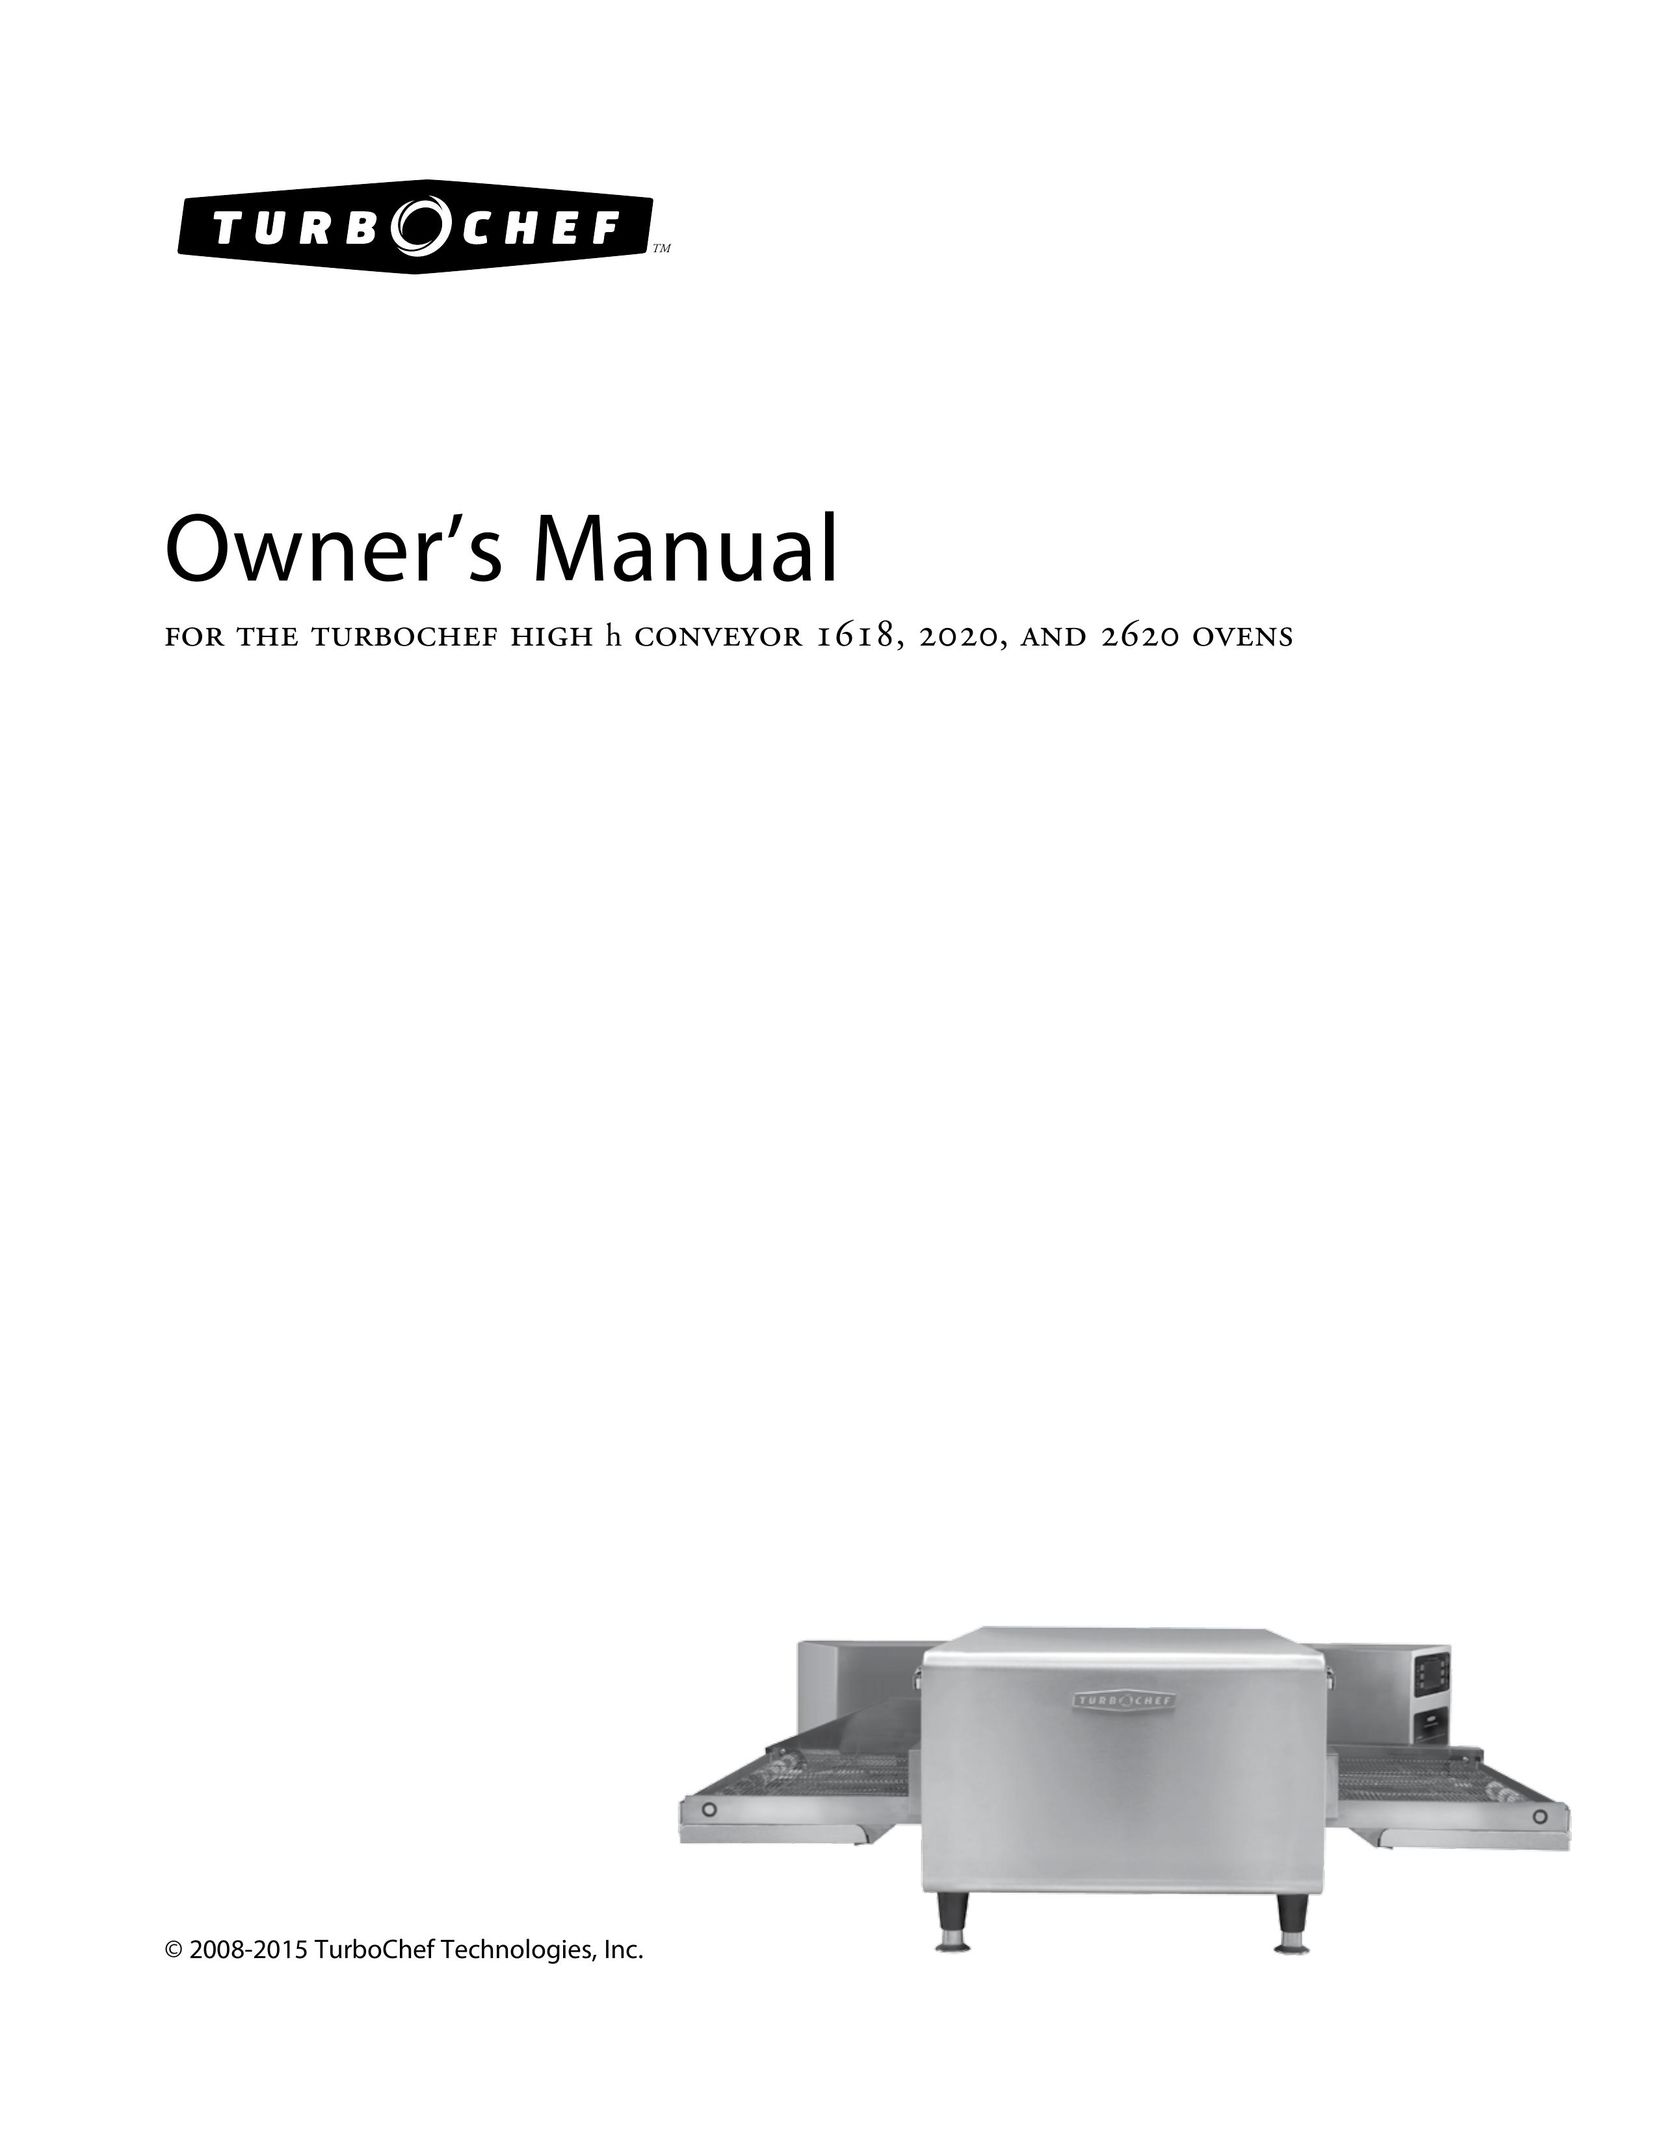 Turbo Chef Technologies conveyor 1618 Convection Oven User Manual